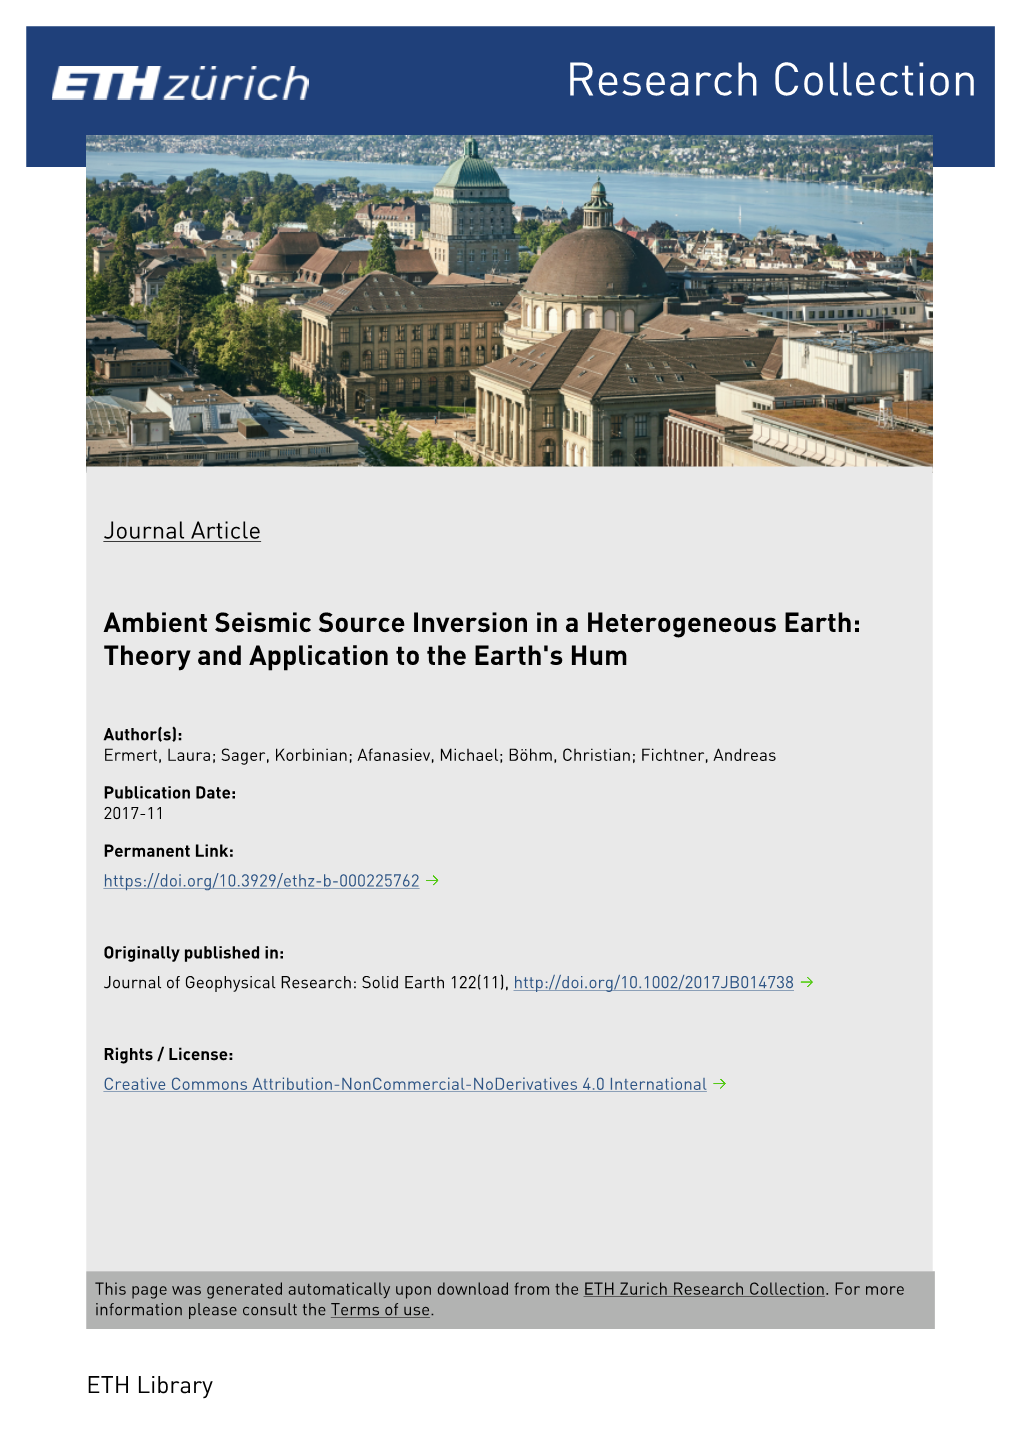 Ambient Seismic Source Inversion in a Heterogeneous Earth: Theory and Application to the Earth's Hum